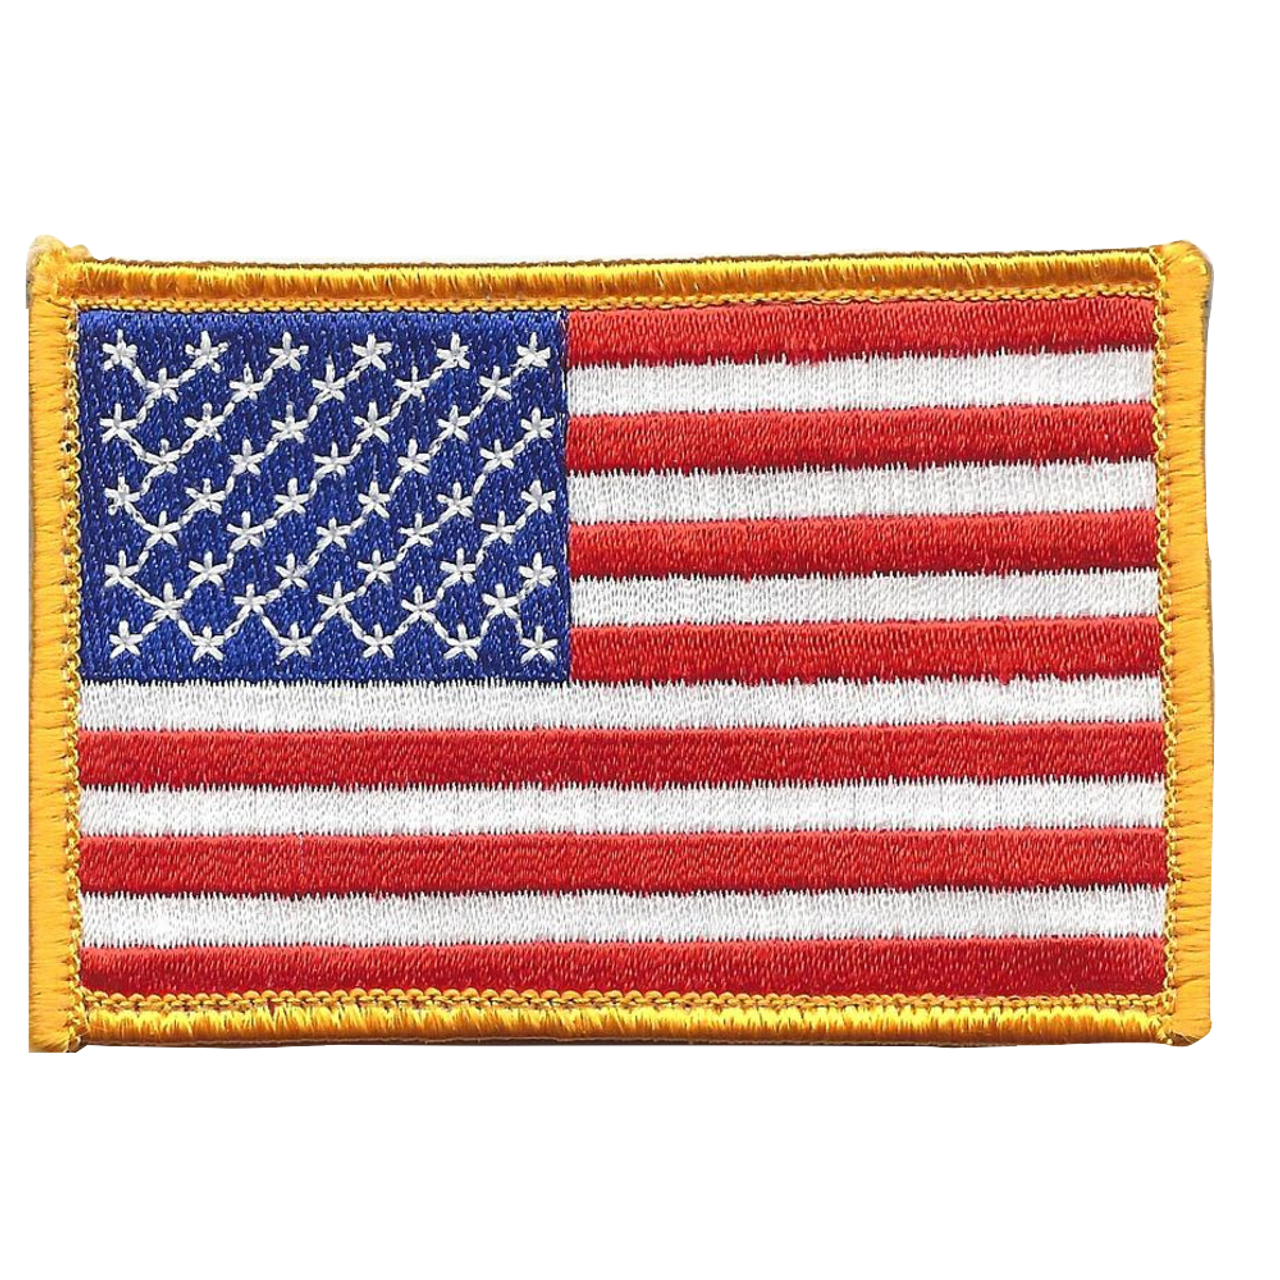 USA Flag (Left Arm) Patch: Rubber Hook-Backing Patch by Hazard 4® -  Outdoor, Military, and Pro Gear - We Ship Internationally